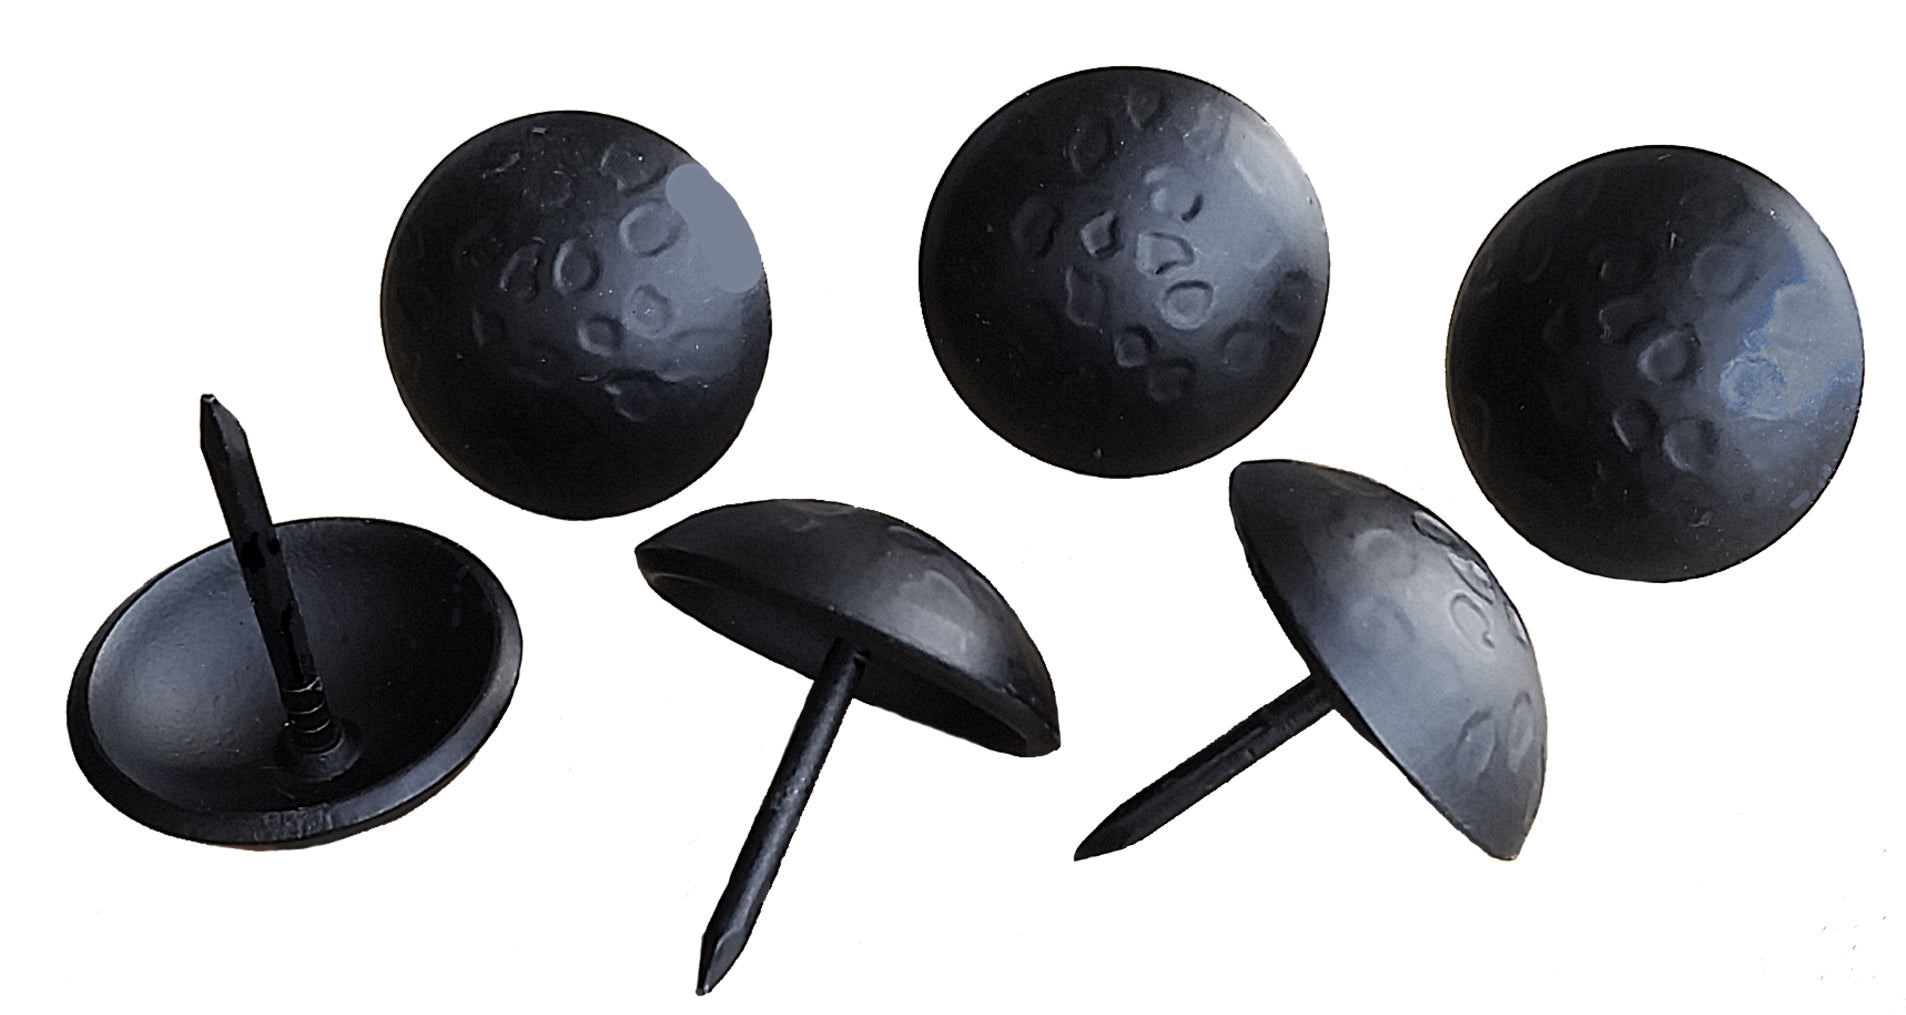 25 pack SALE of Round Clavos - 1" dia. Lightly Hammered - 6 - Matte black finish - Wild West Hardware